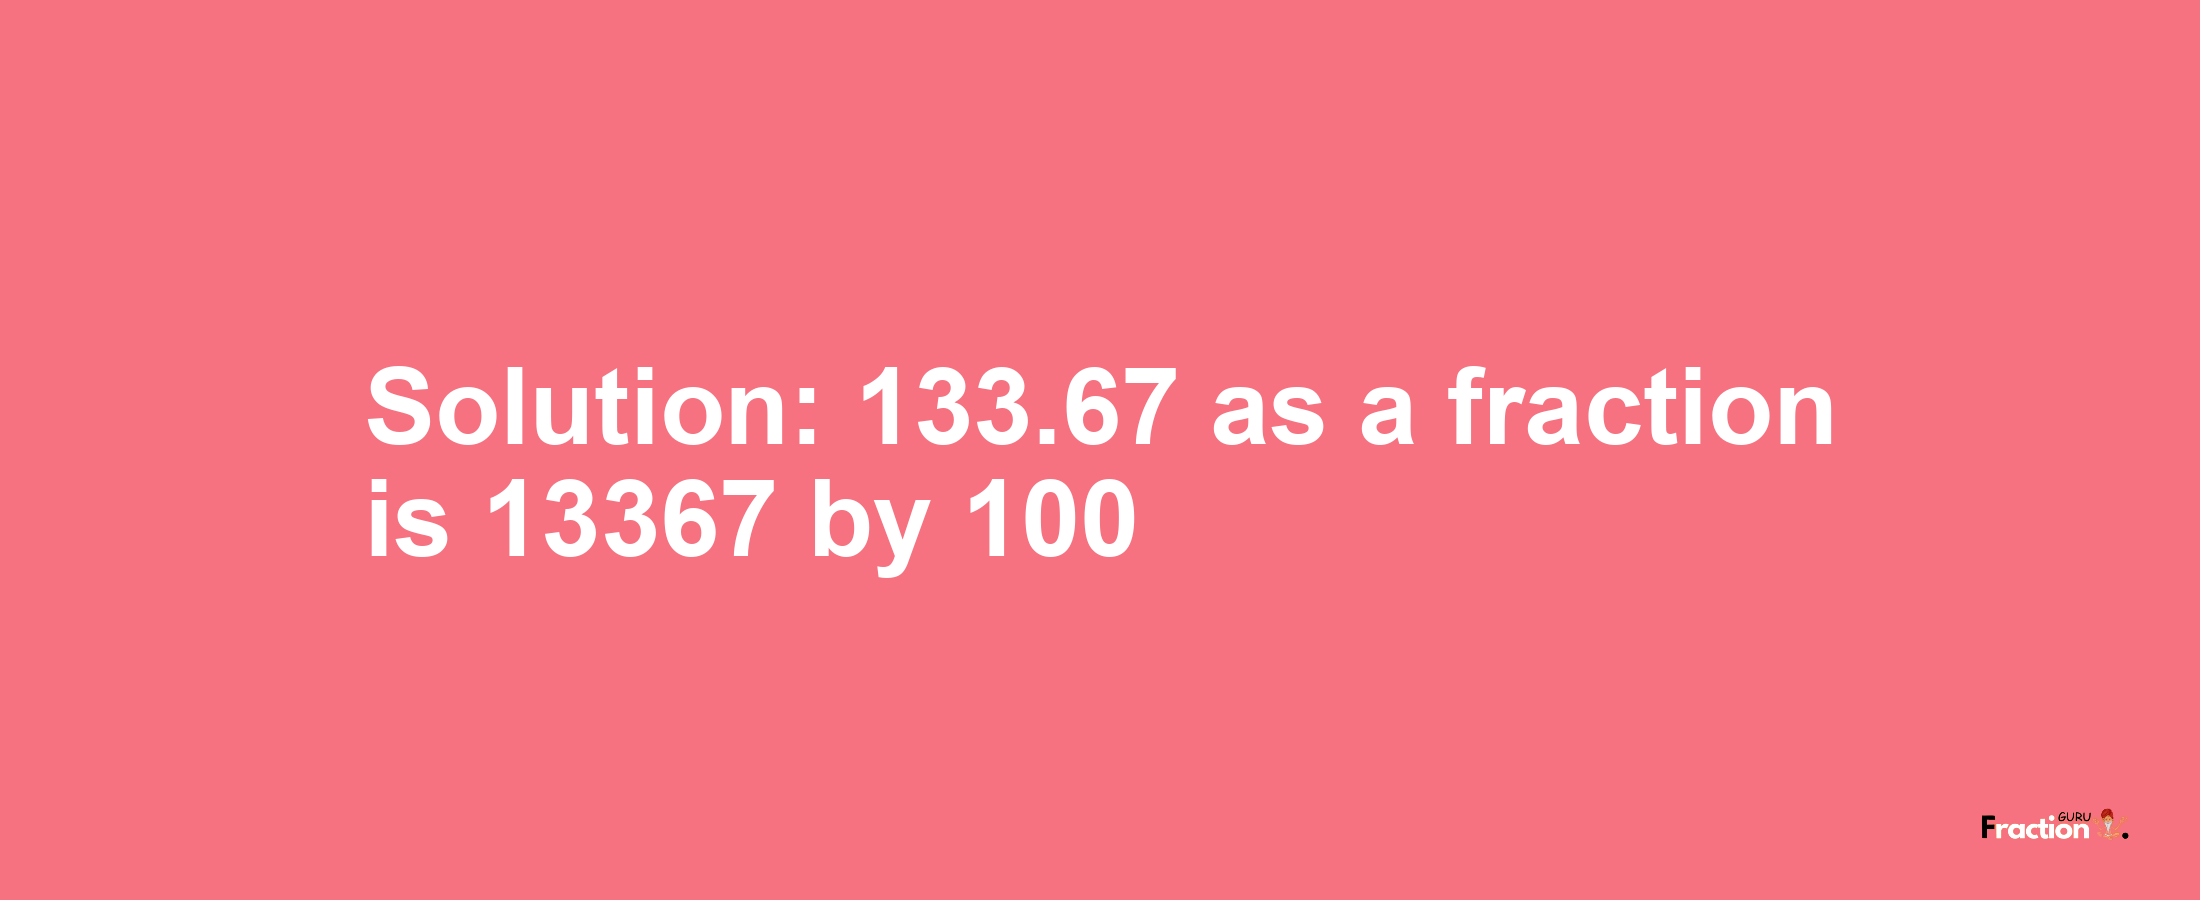 Solution:133.67 as a fraction is 13367/100